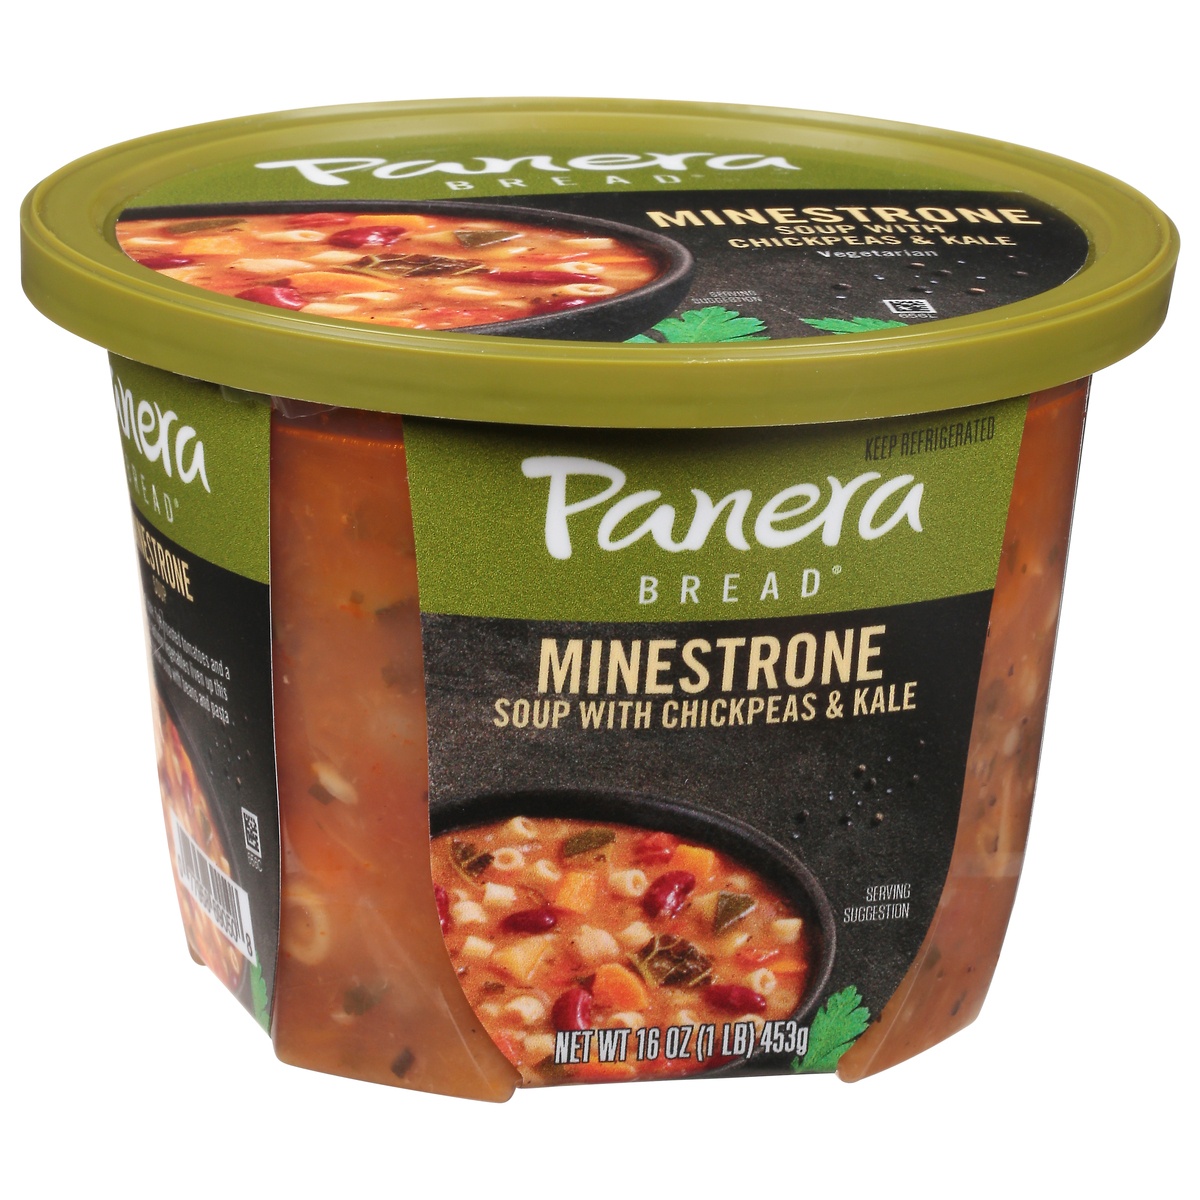 slide 2 of 11, Panera Minestrone Soup with Chickpeas & Kale, 16 oz